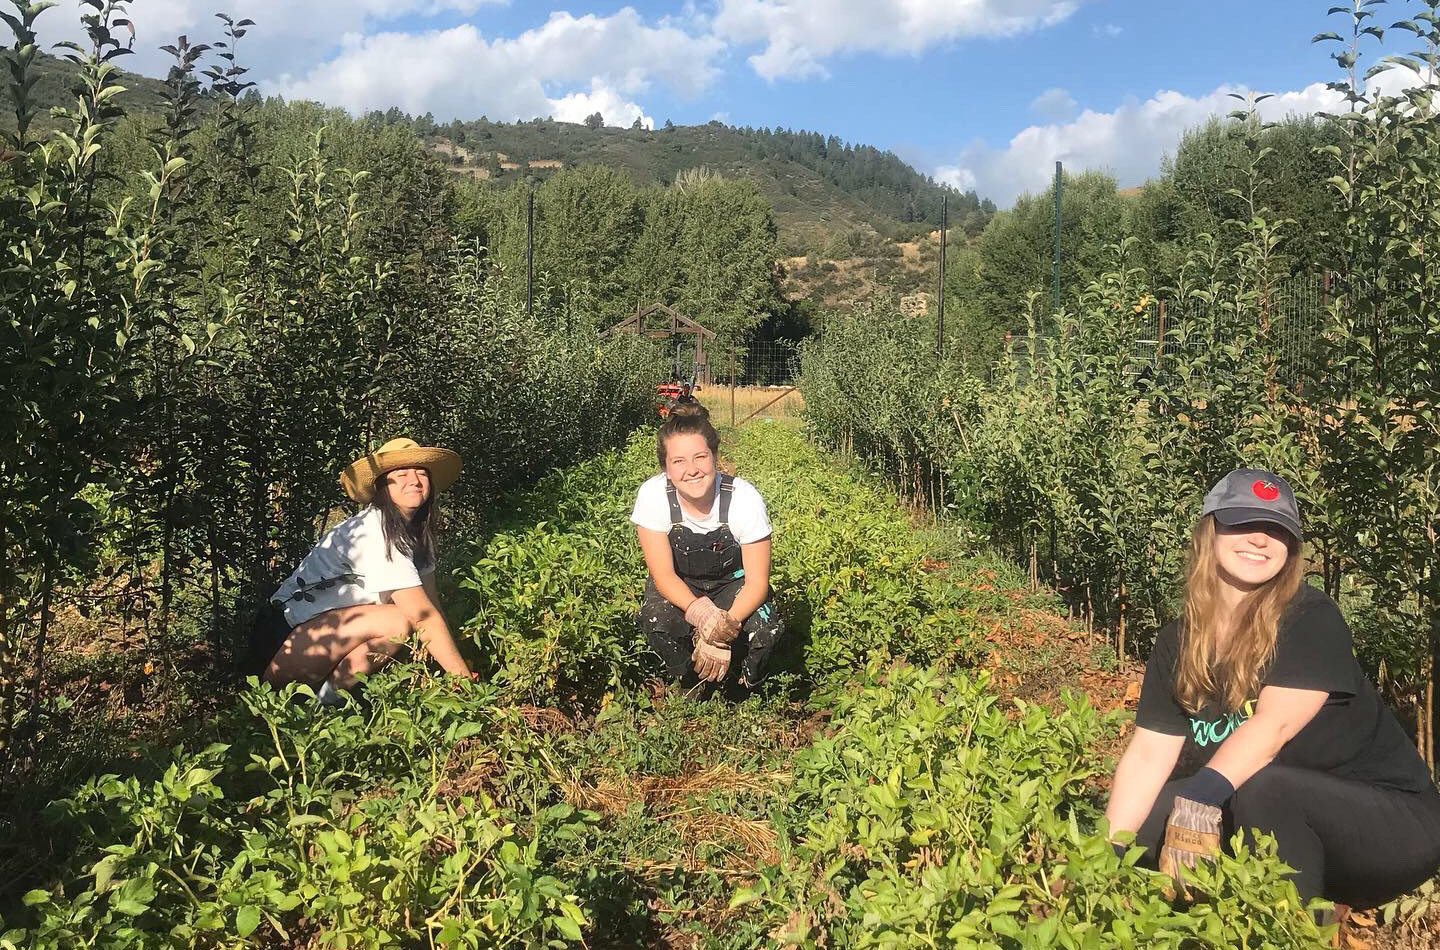 For the final installment of Moutain Towns & Local Food Systems on the Blister Podcast, Rachel Landis of the Good Food Collective in Durango, CO, discusses what it means to build connectivity, bring people together, and be a facilitator of local food for a regional food hub.